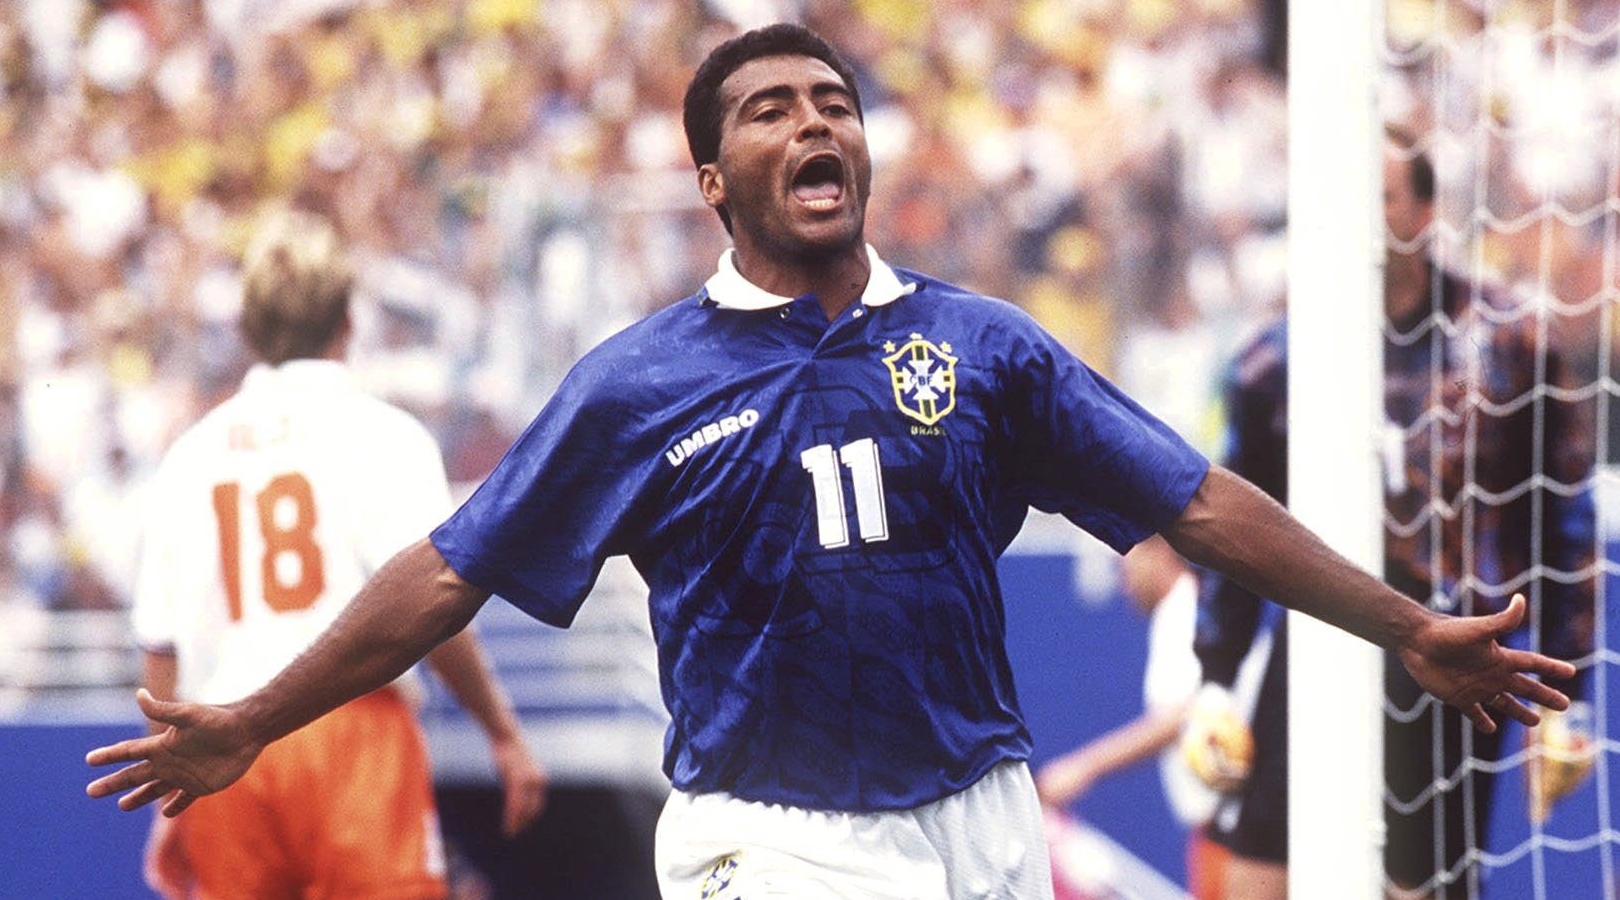 Romario celebrates a goal for Brazil against the Netherlands at the 1994 World Cup.